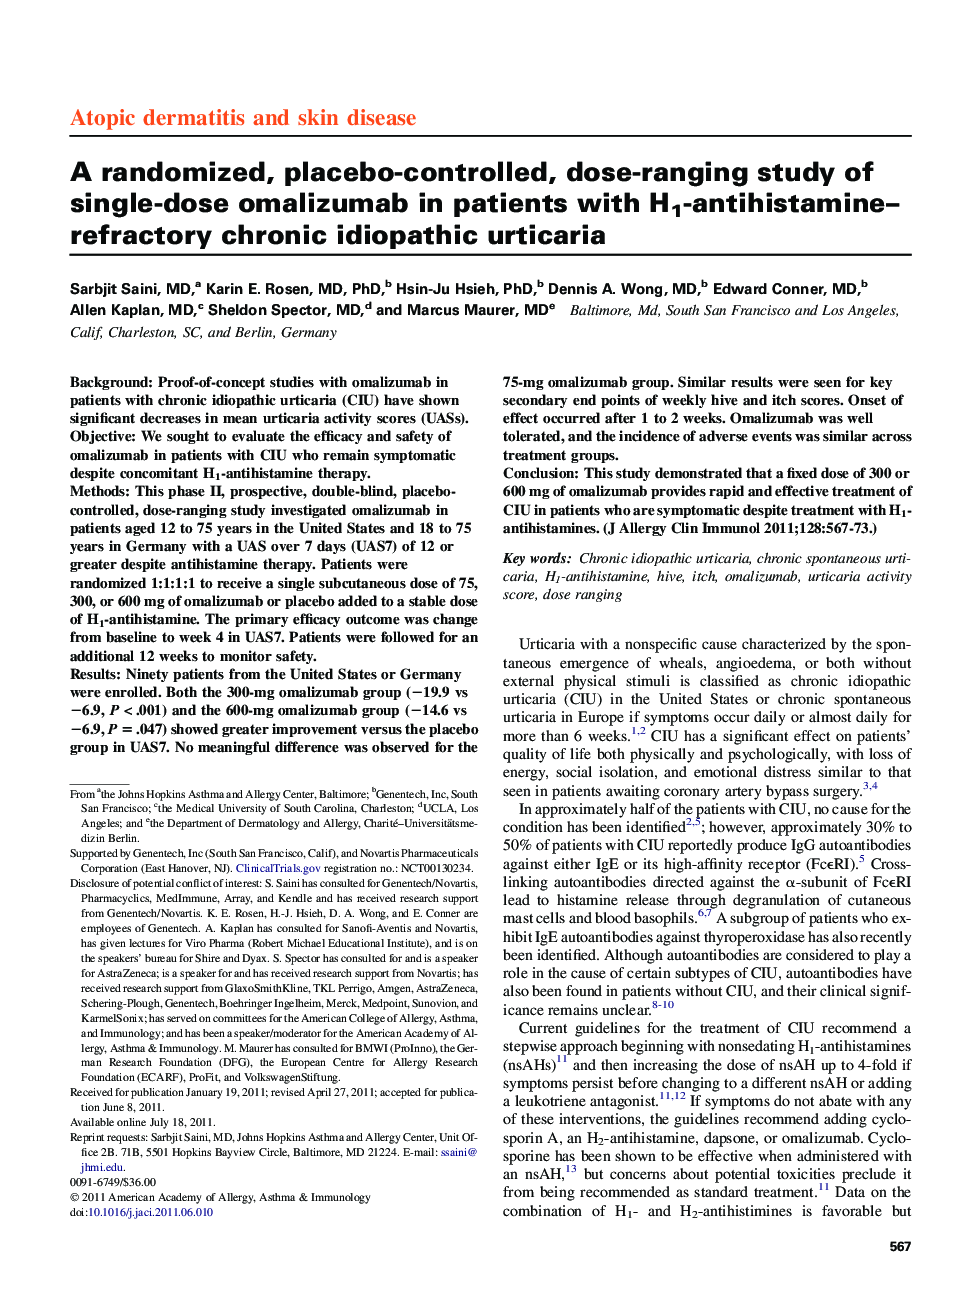 A randomized, placebo-controlled, dose-ranging study of single-dose omalizumab in patients with H1-antihistamine-refractory chronic idiopathic urticaria